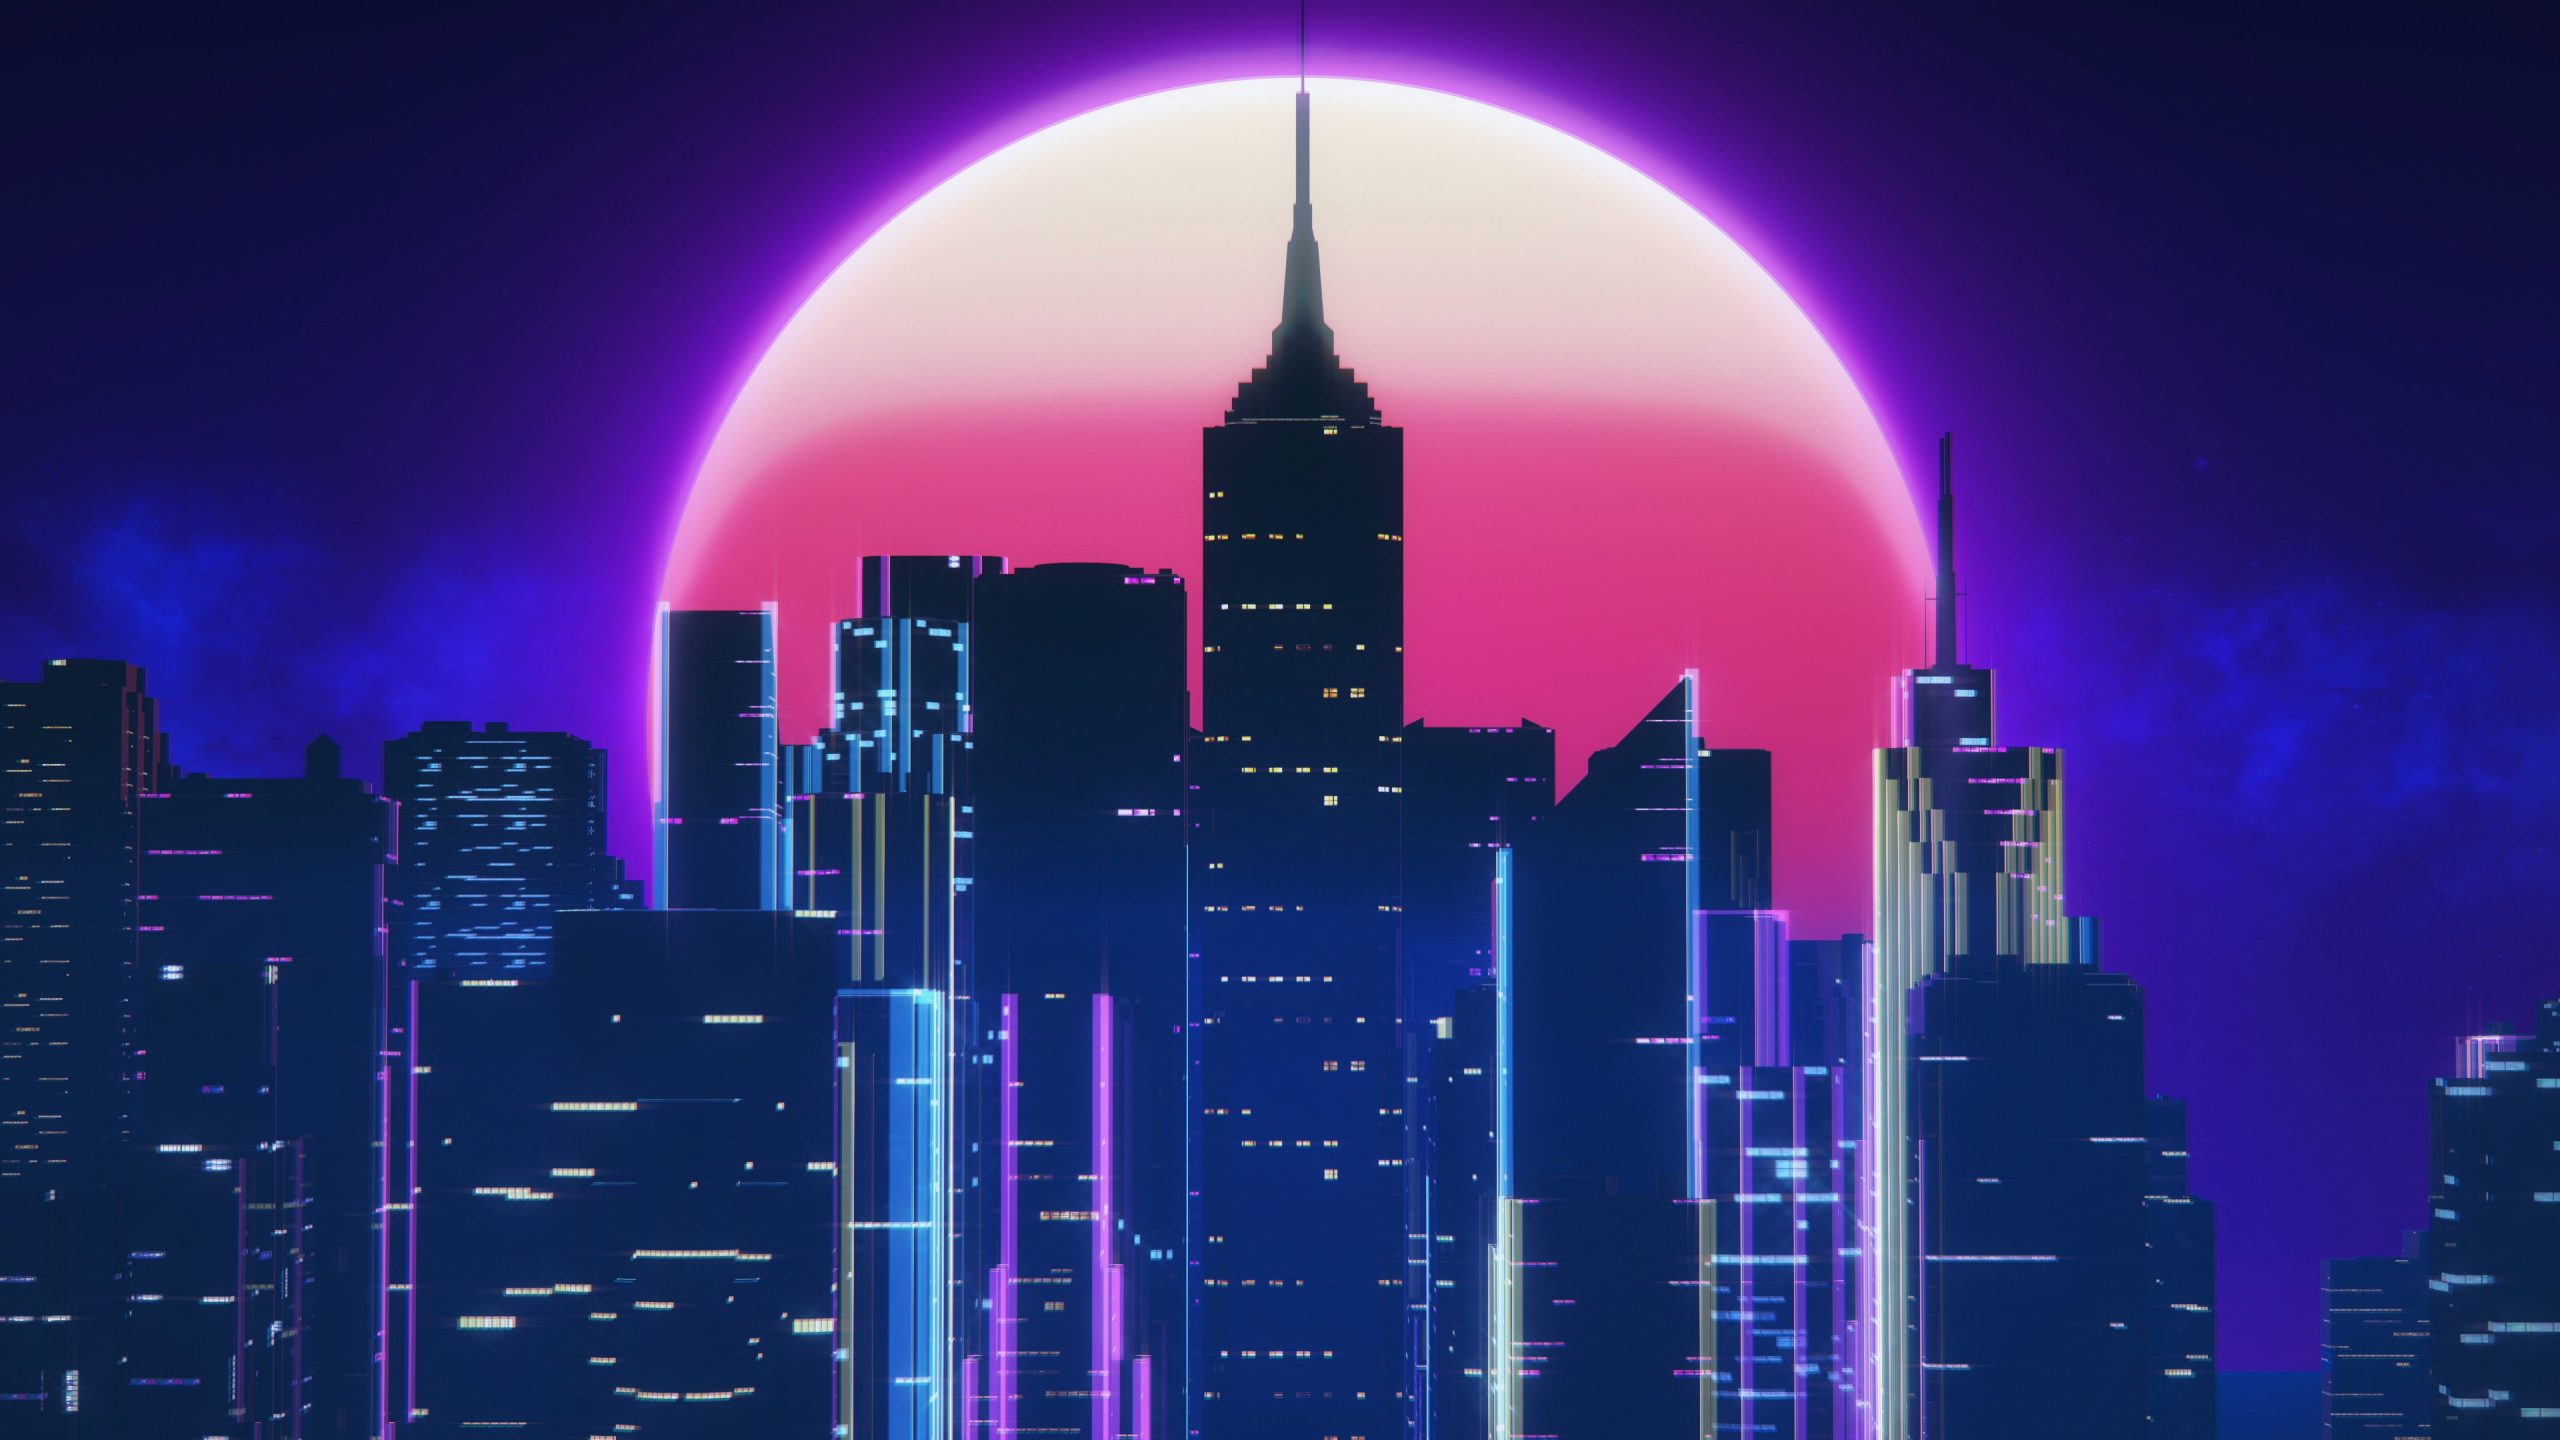 Night wallpaper, Music, The city, The moon, Style, Neon, 80's, Synth